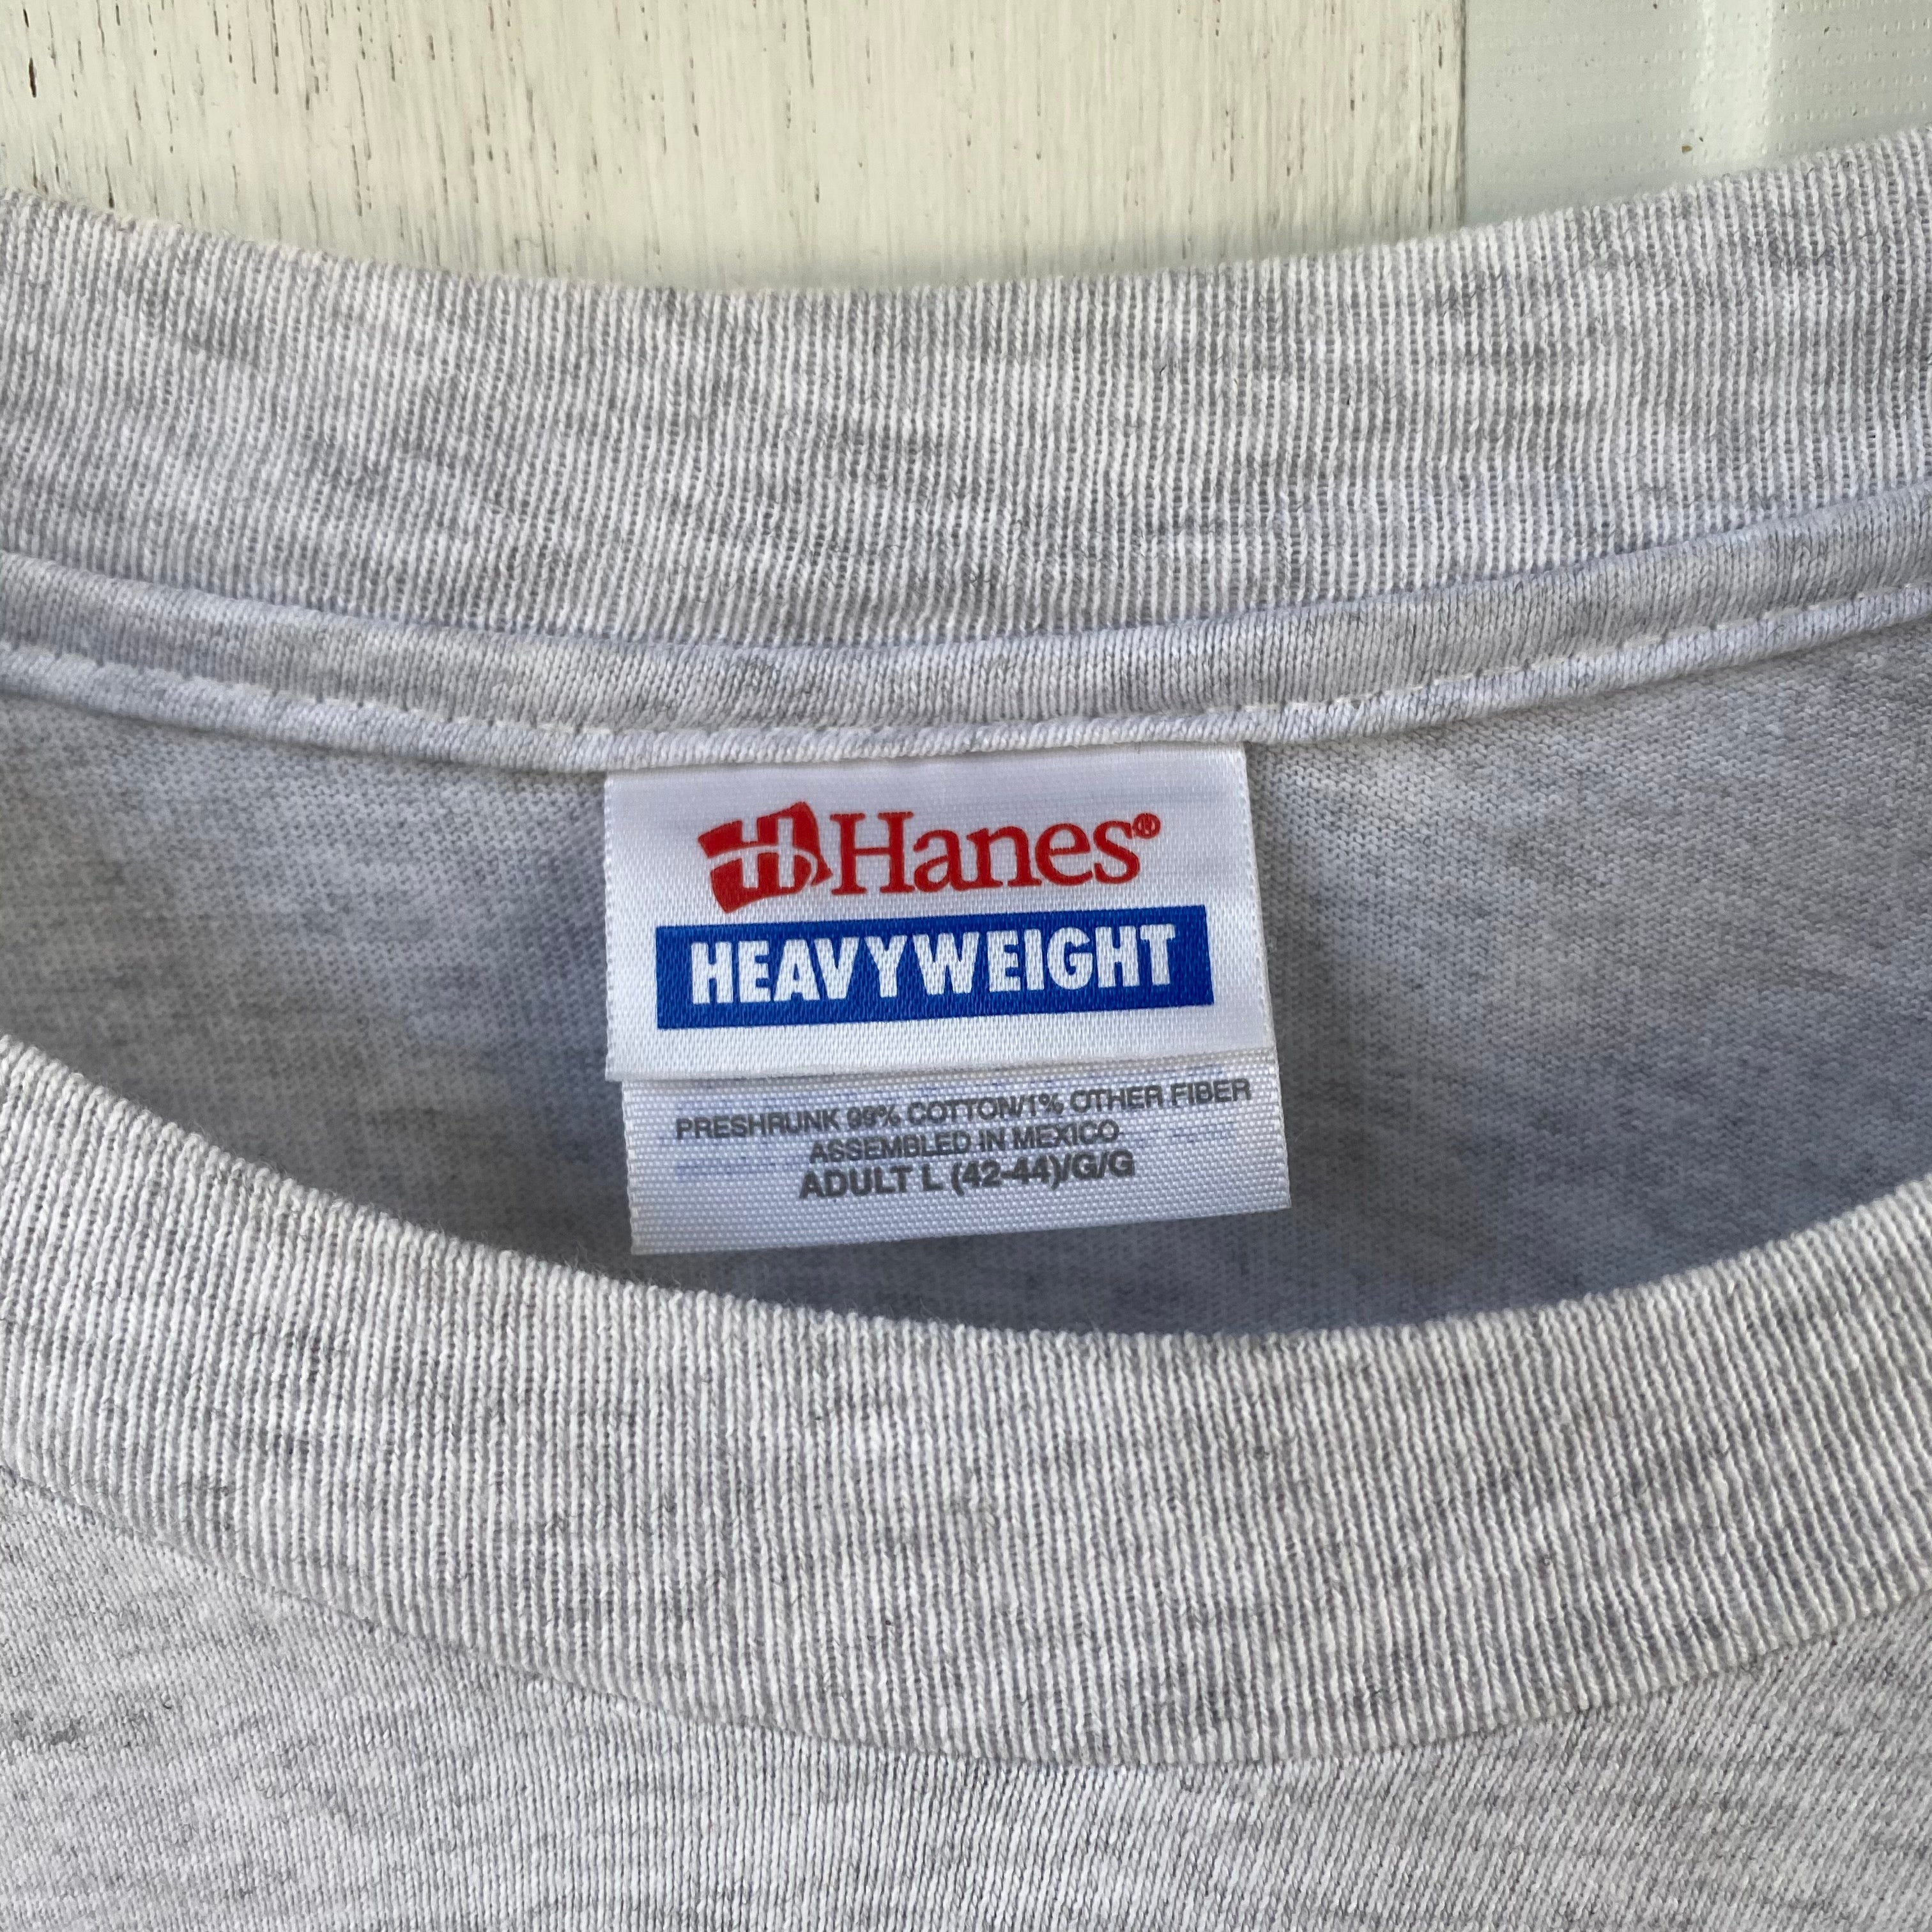 UNITED STATES CONGRESS SWEAT SHIRT / Mr.Clean Select